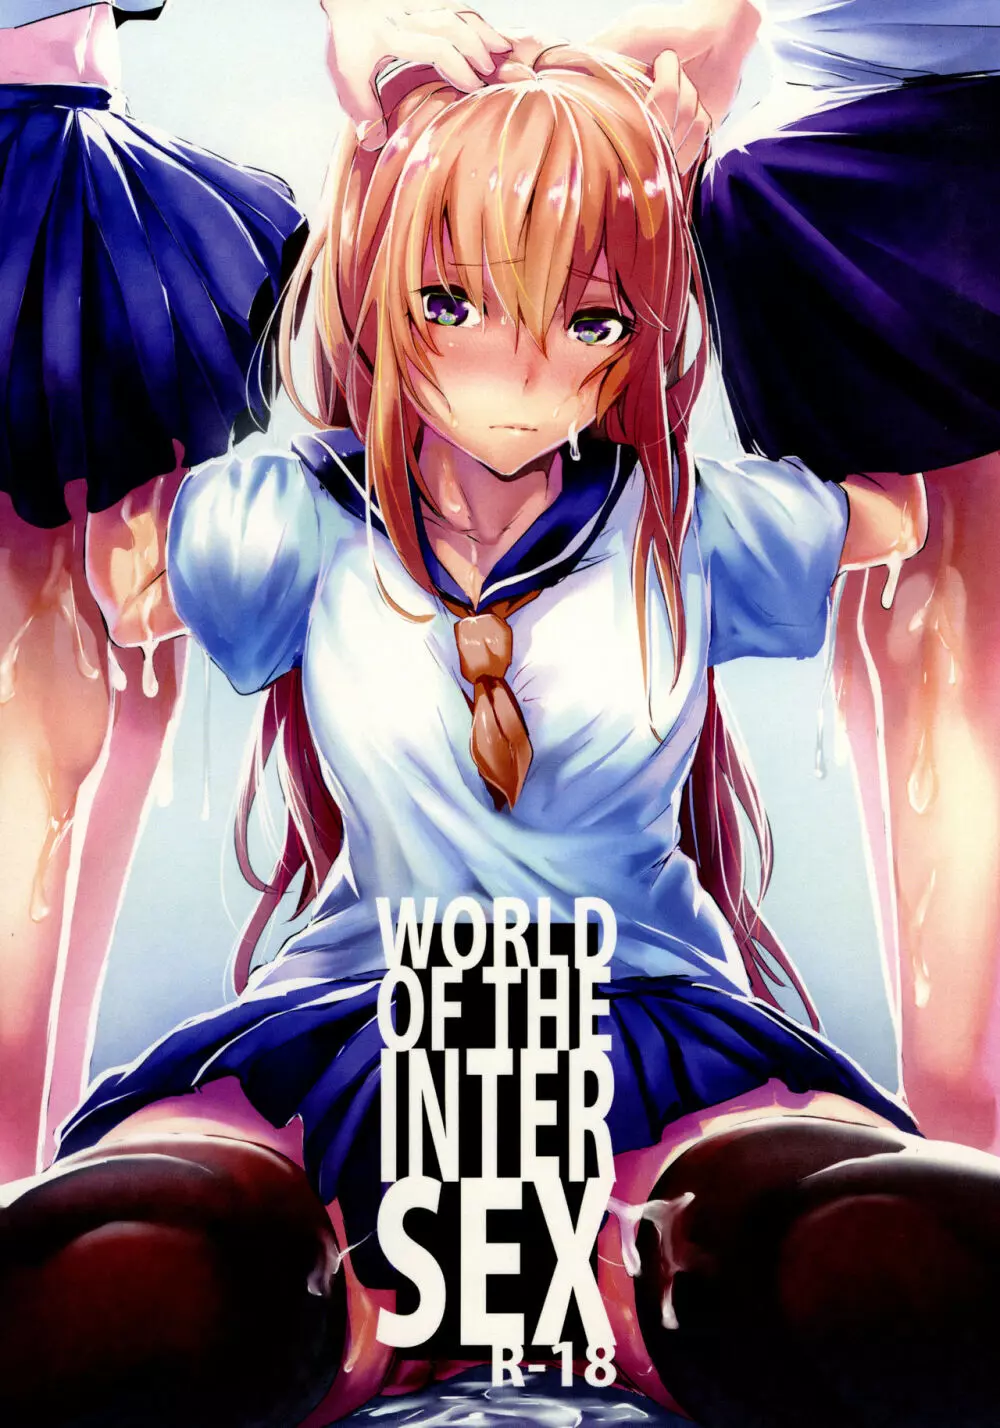 WORLD OF THE INTER SEX